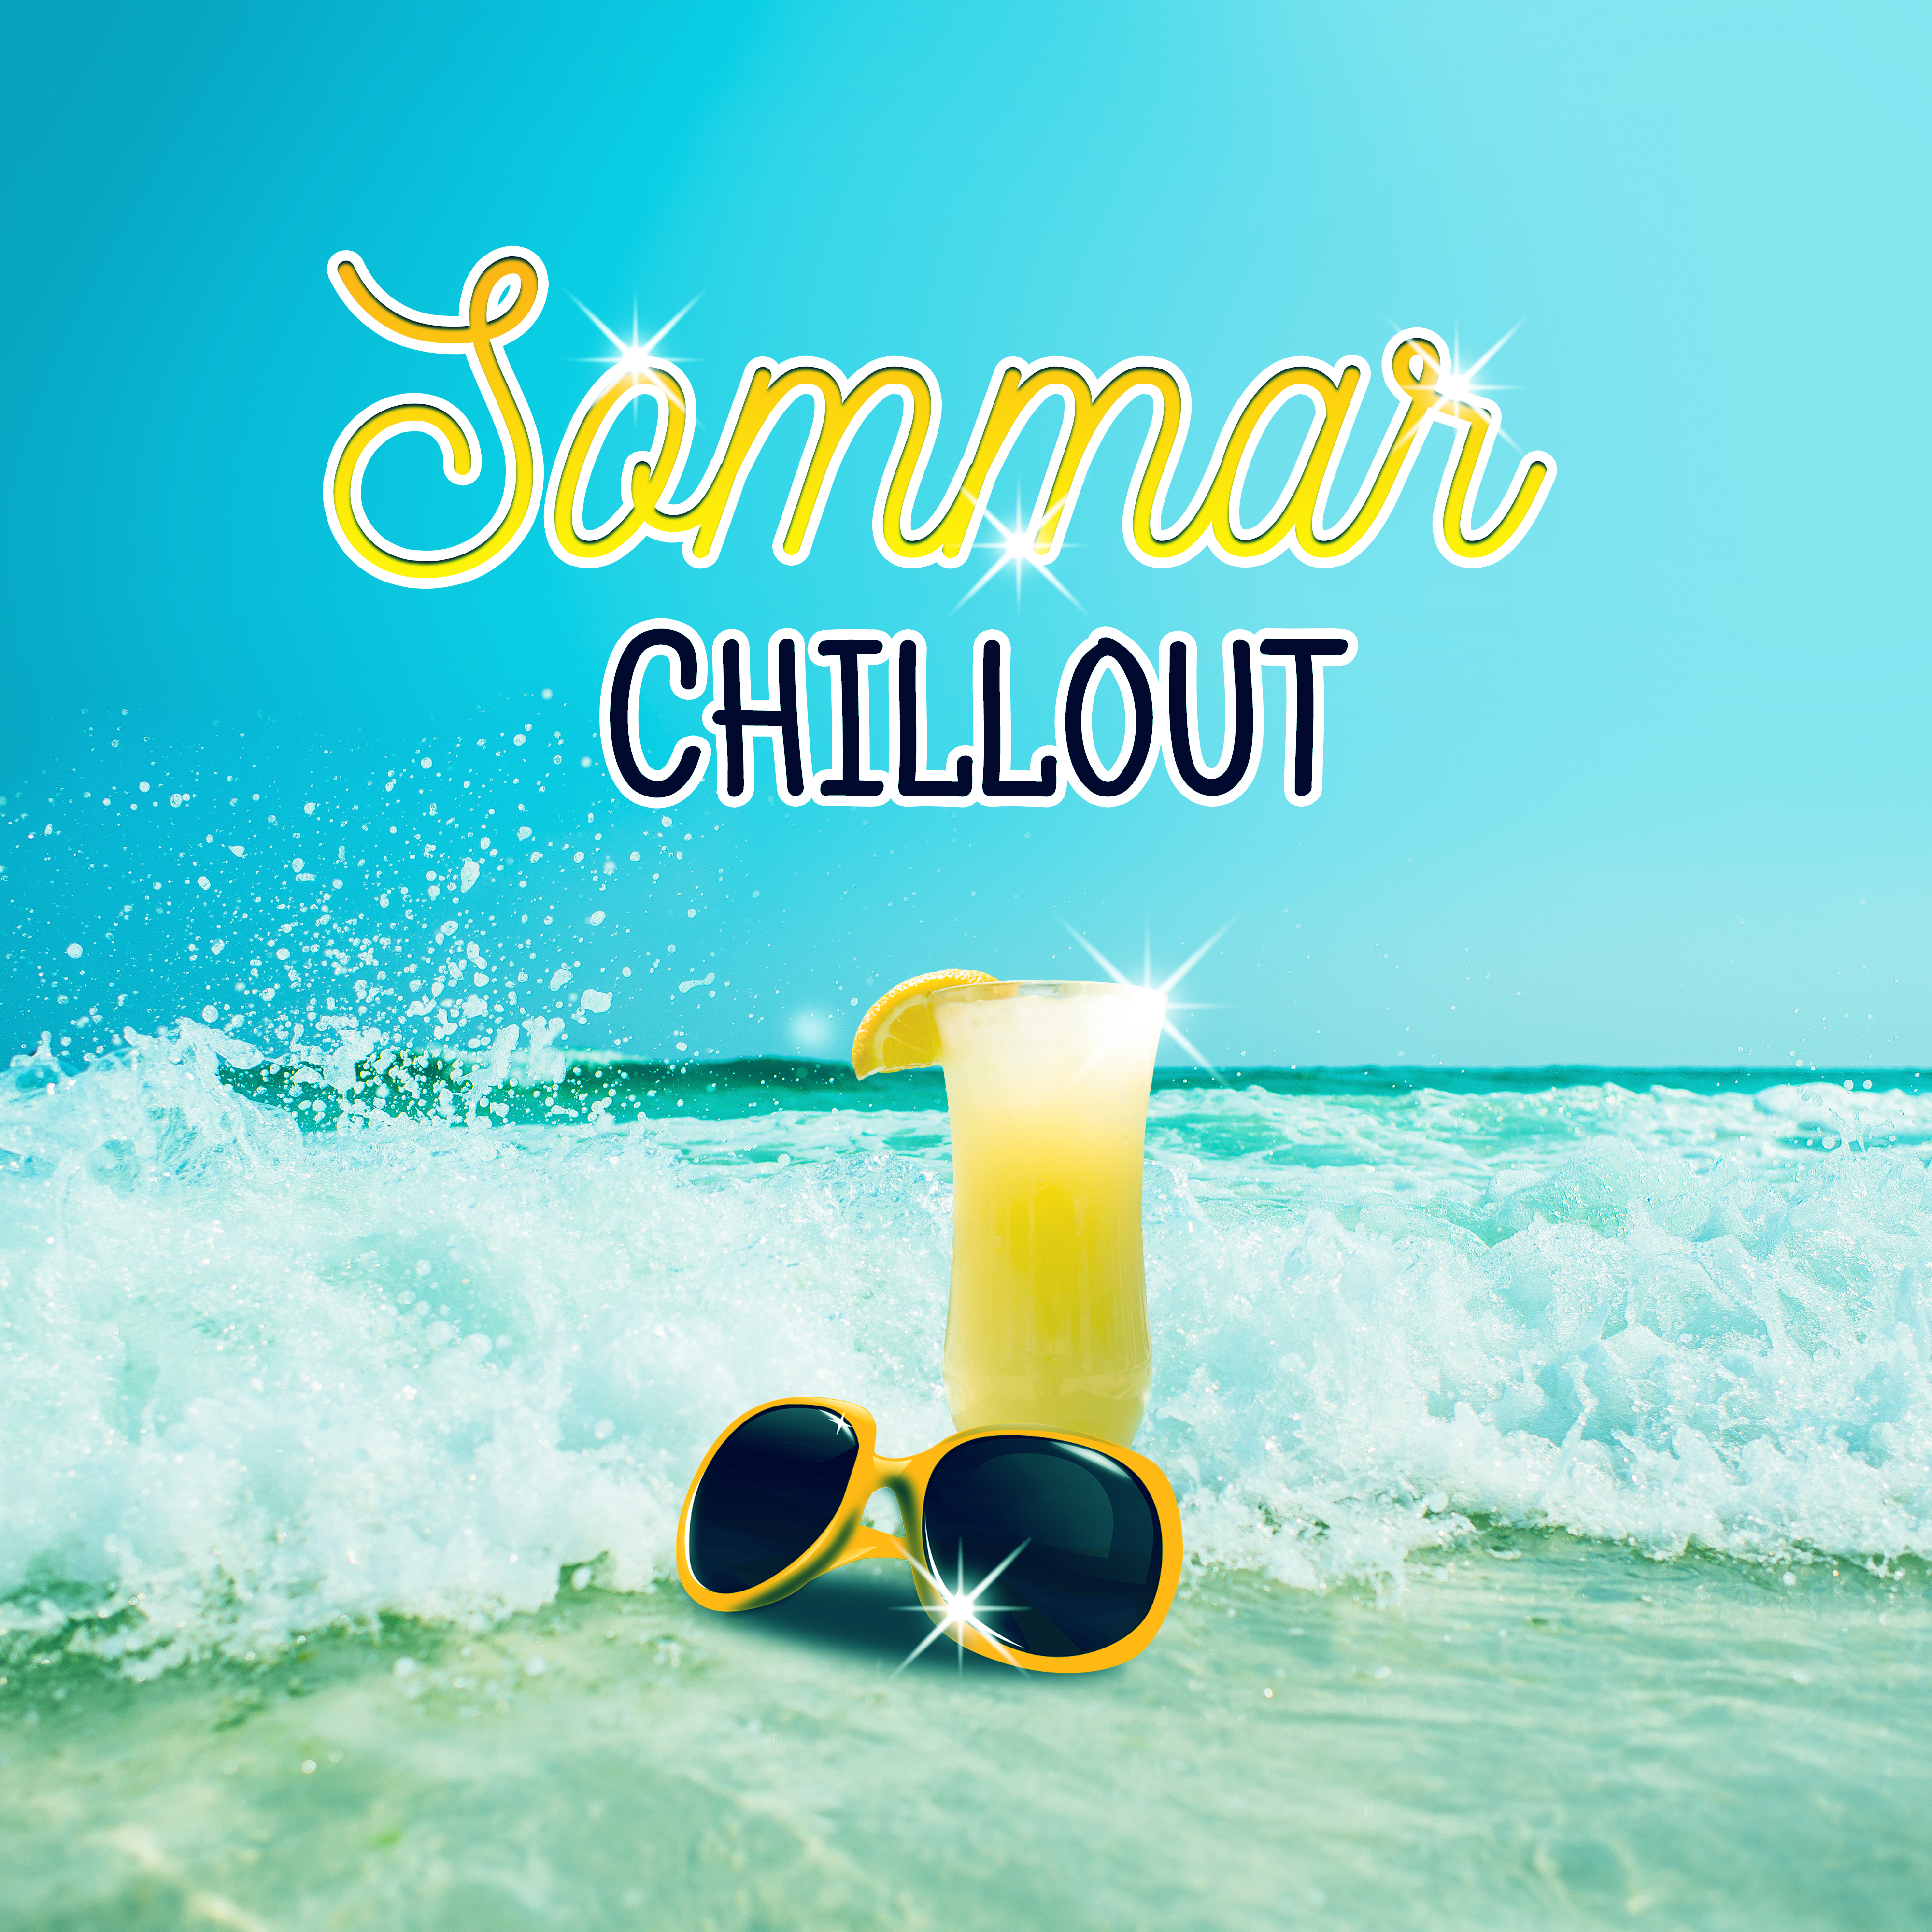 Sommar Chillout  Relax  Chill, Best of Chillout 2017, Beach Music, Dance